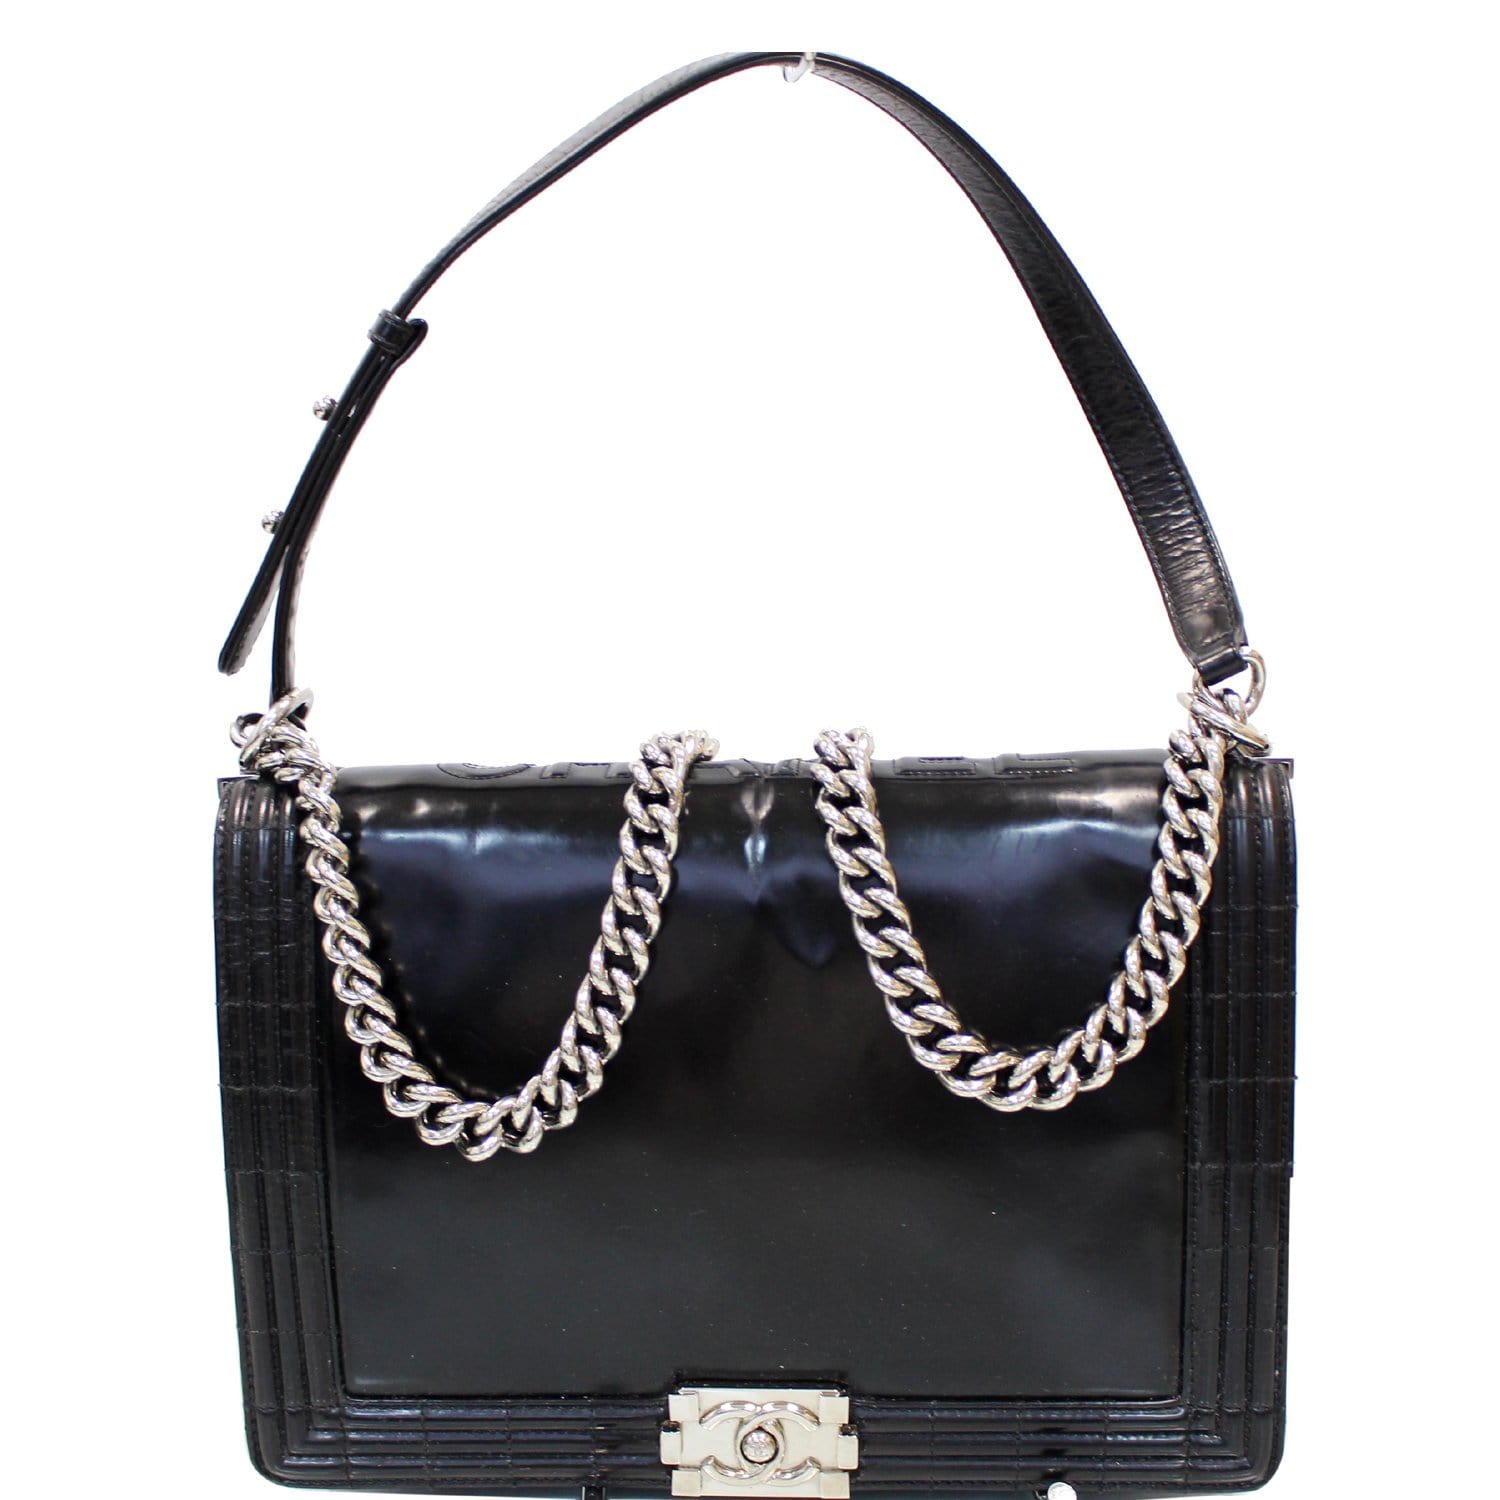 Chanel 2015 Boy Bag on Chain  Rent Chanel Handbags for $195/month